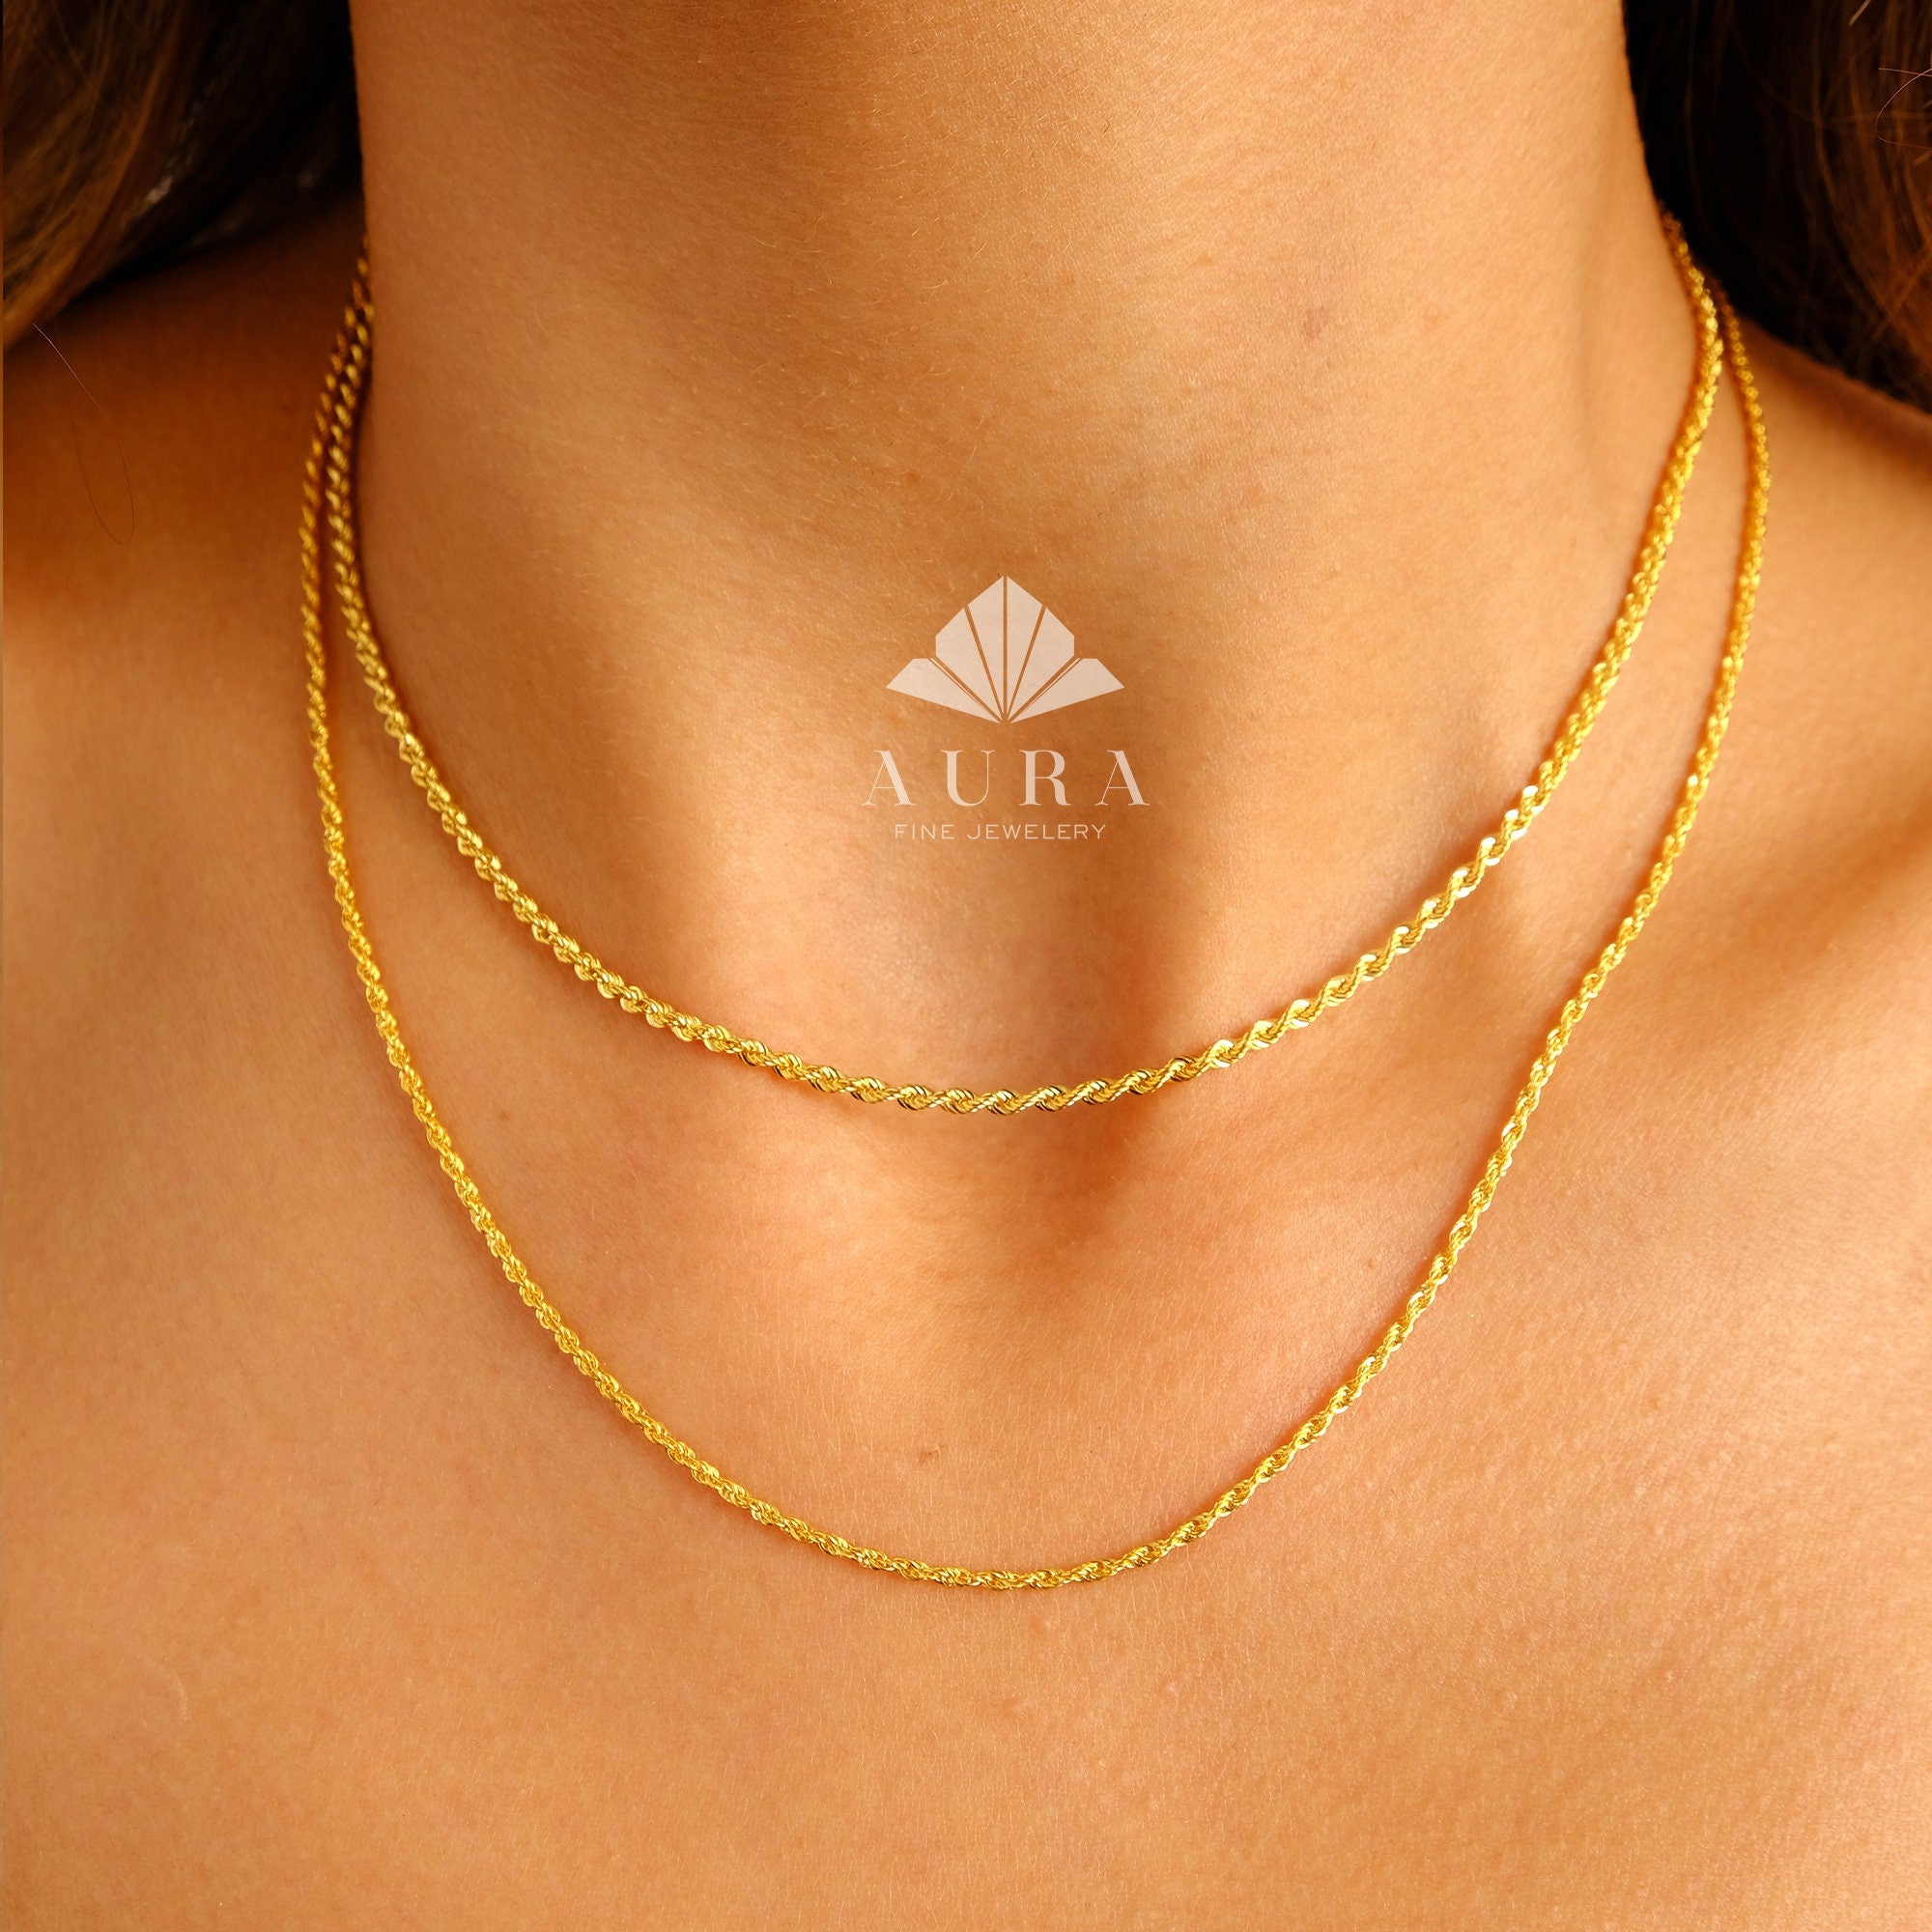 Buy Gold Rope Chain Necklace, Gold Rope Necklace, Gold Chain Necklace,  French Rope Chain, Thick Snake Chain, Herringbone Choker, Key Necklace  Online in India - Etsy